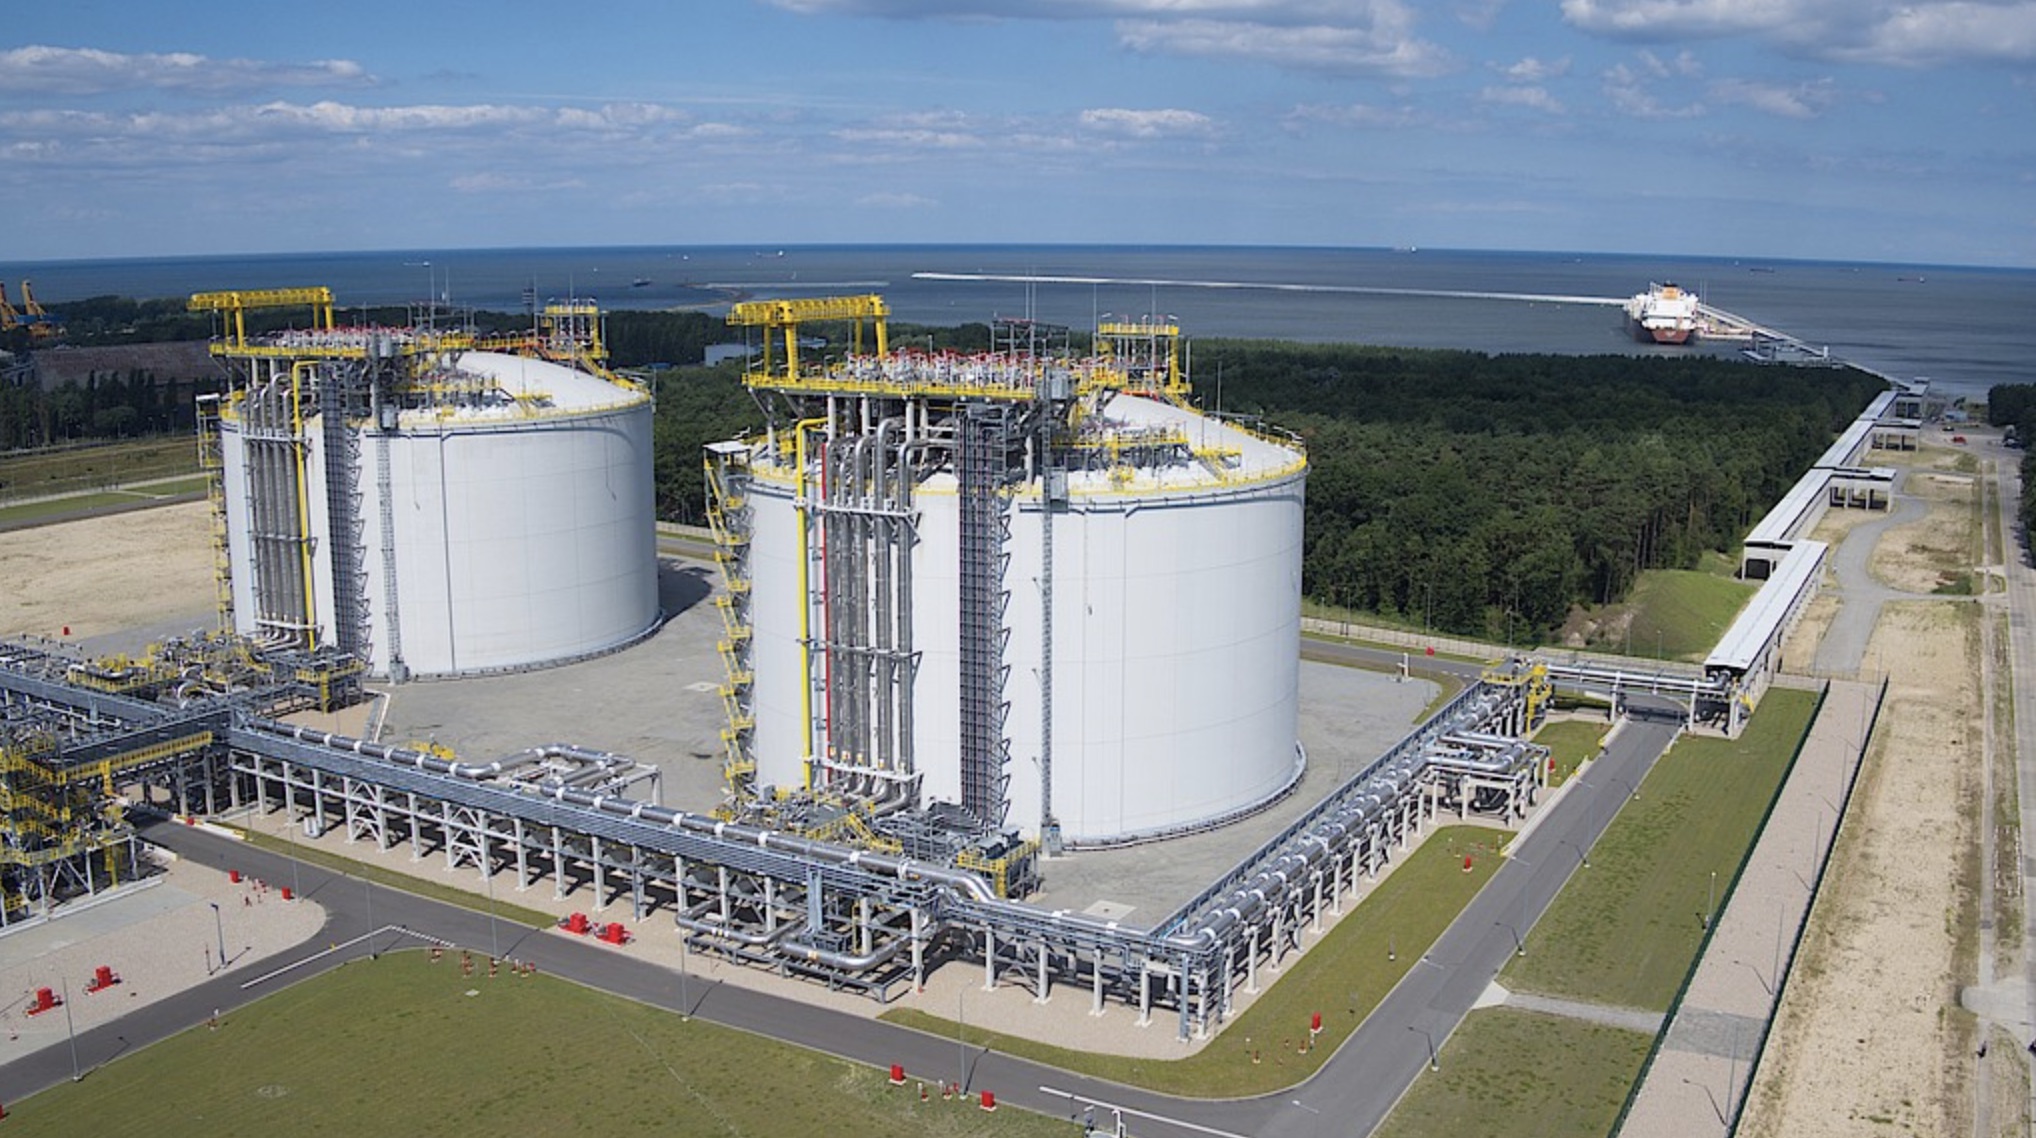 Contract for the extension of the Świnoujście LNG Terminal has been signed - MarinePoland.com